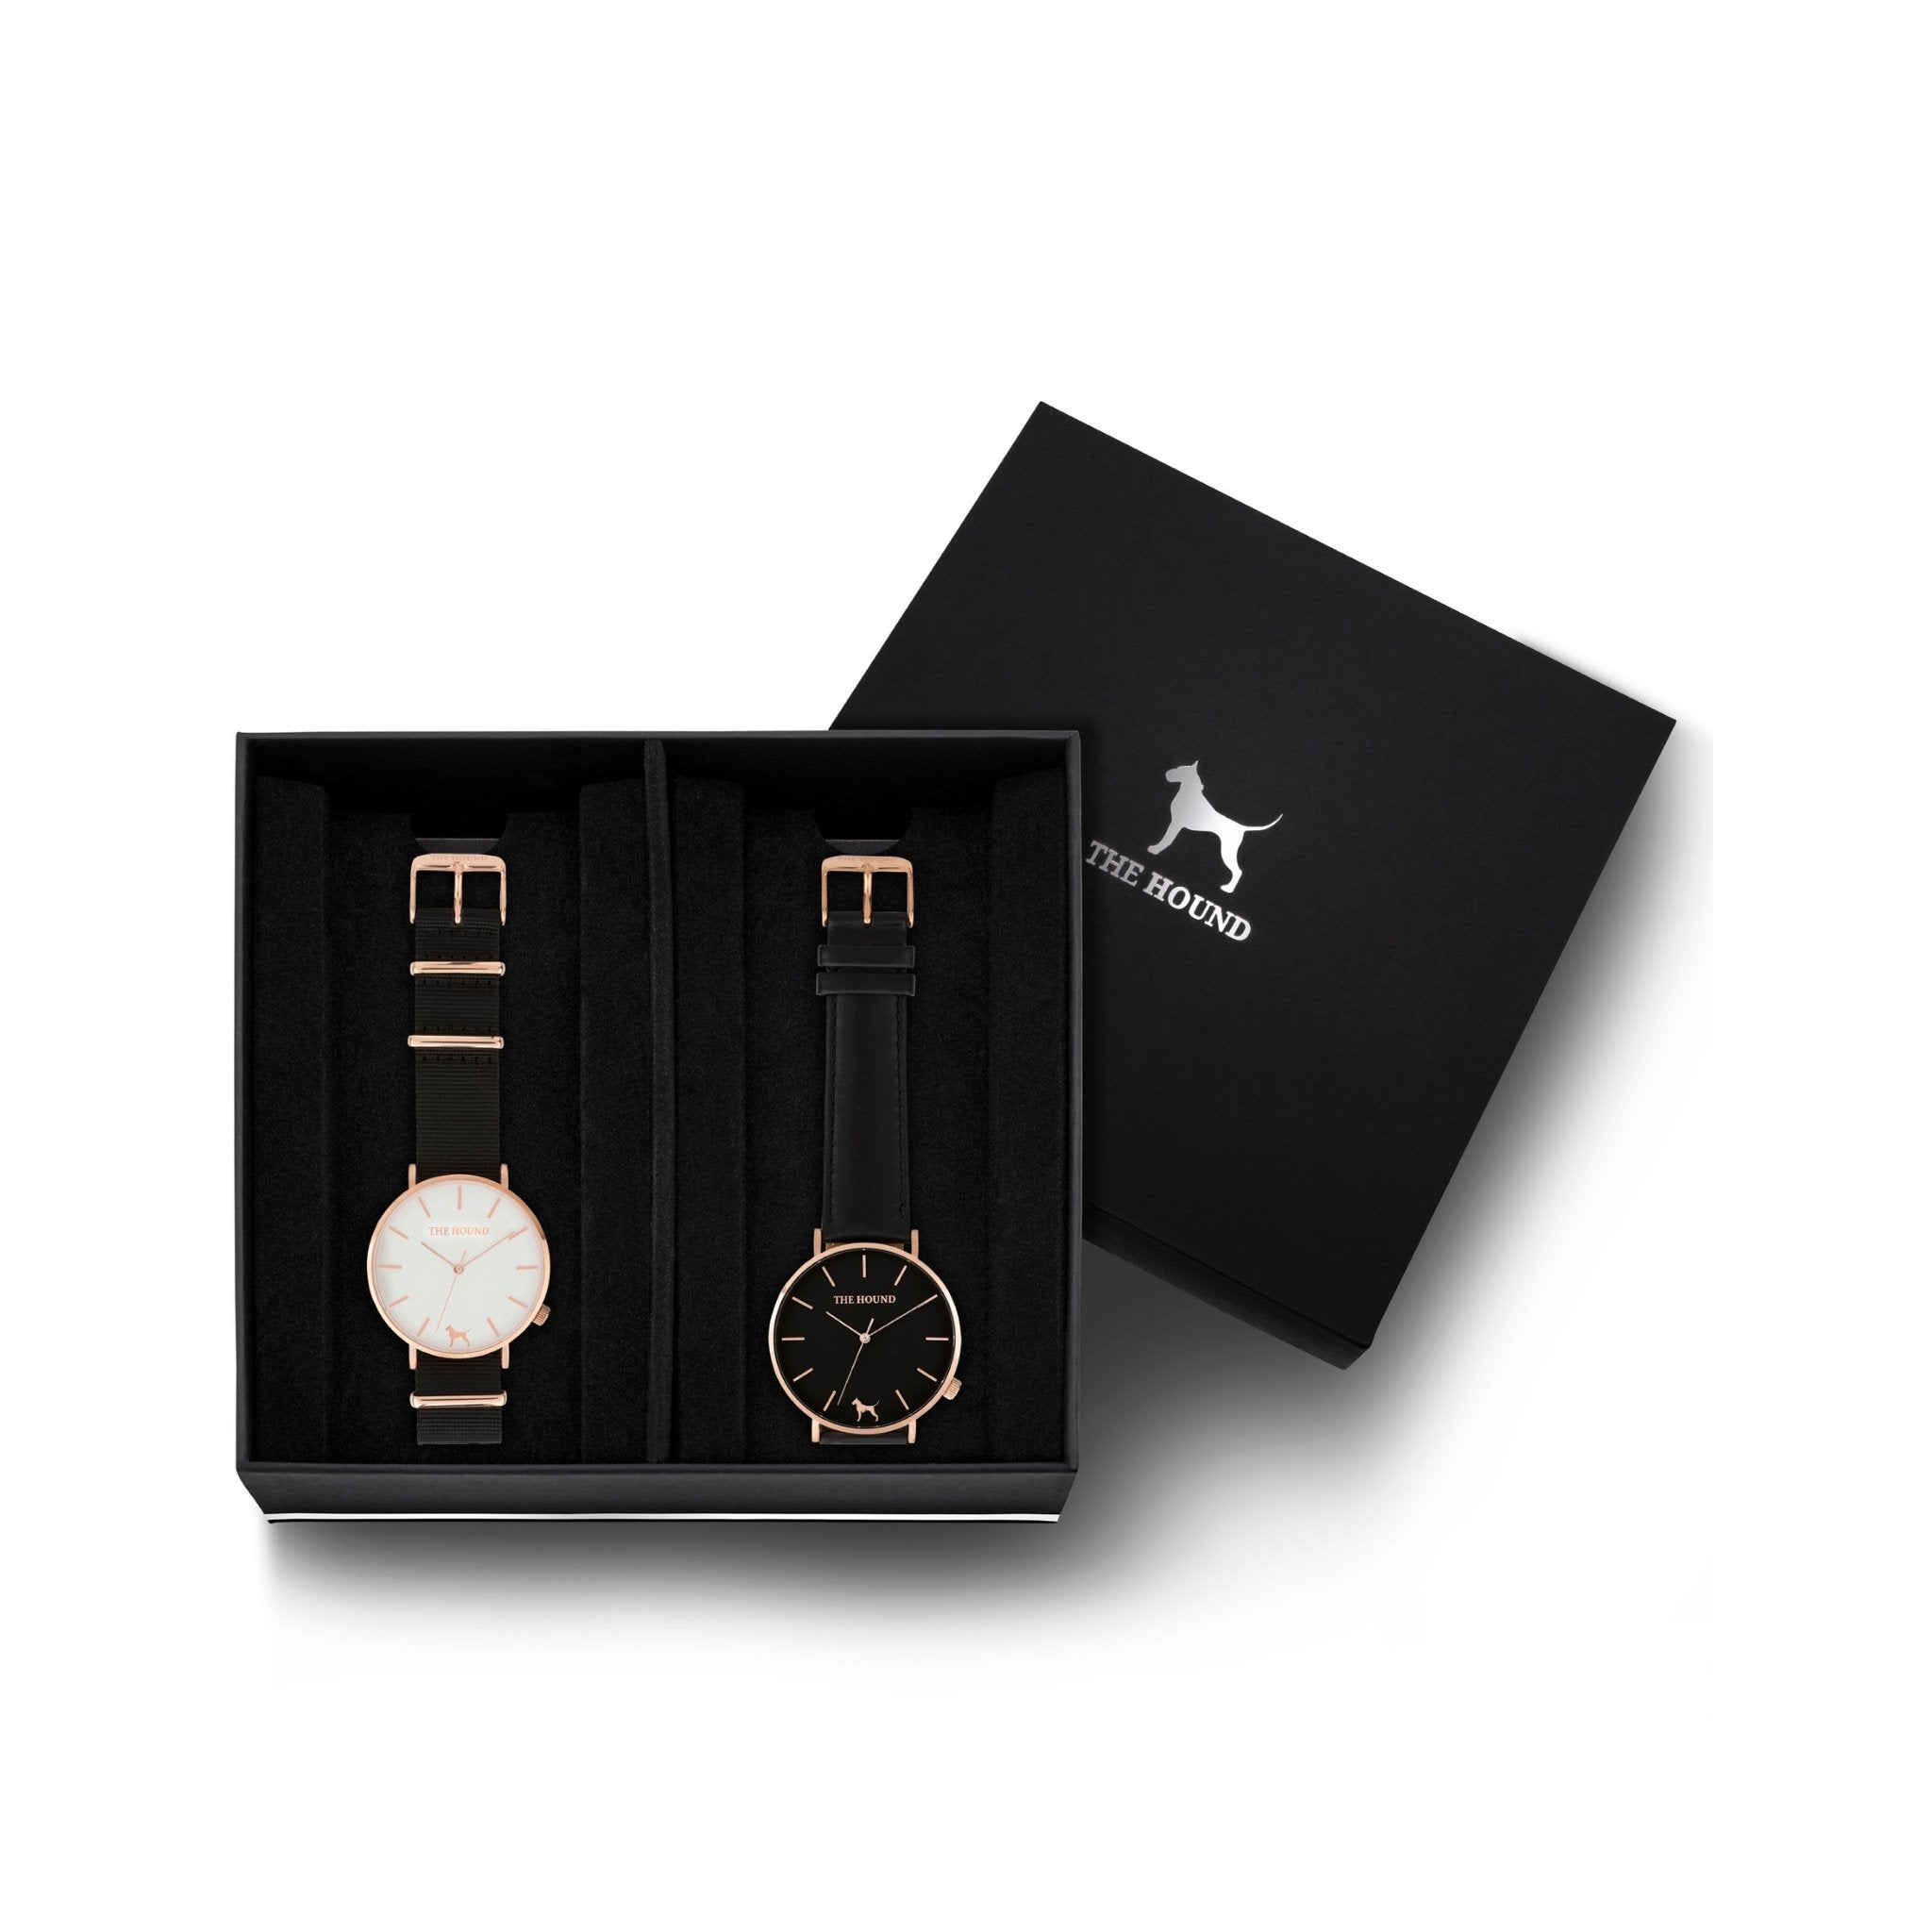 Custom gift set - Rose gold and white watch with black nato band and a rose gold and black watch with stitched black genuine leather band